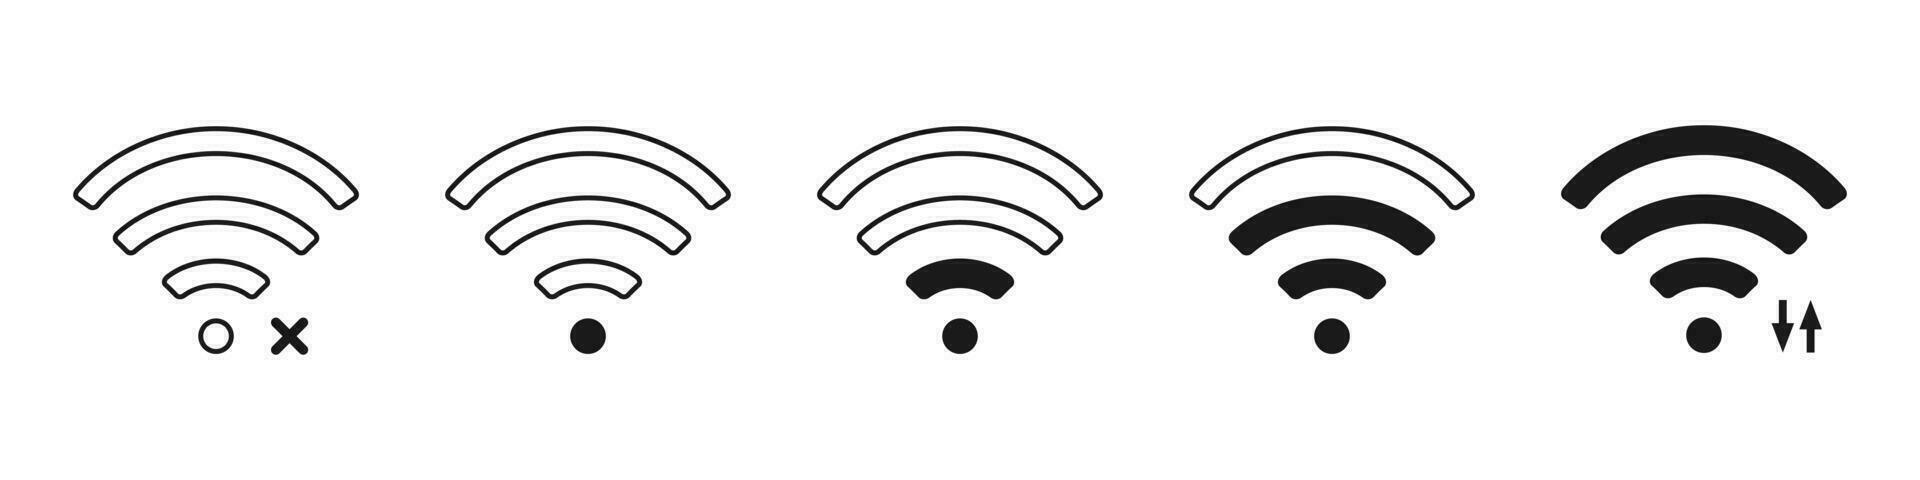 Wifi level strenght on white background. Isolated network symbol in black color. Outline wi fi pictogram level. Status of connection satellite. Wi-fi power sign. Vector EPS 10.